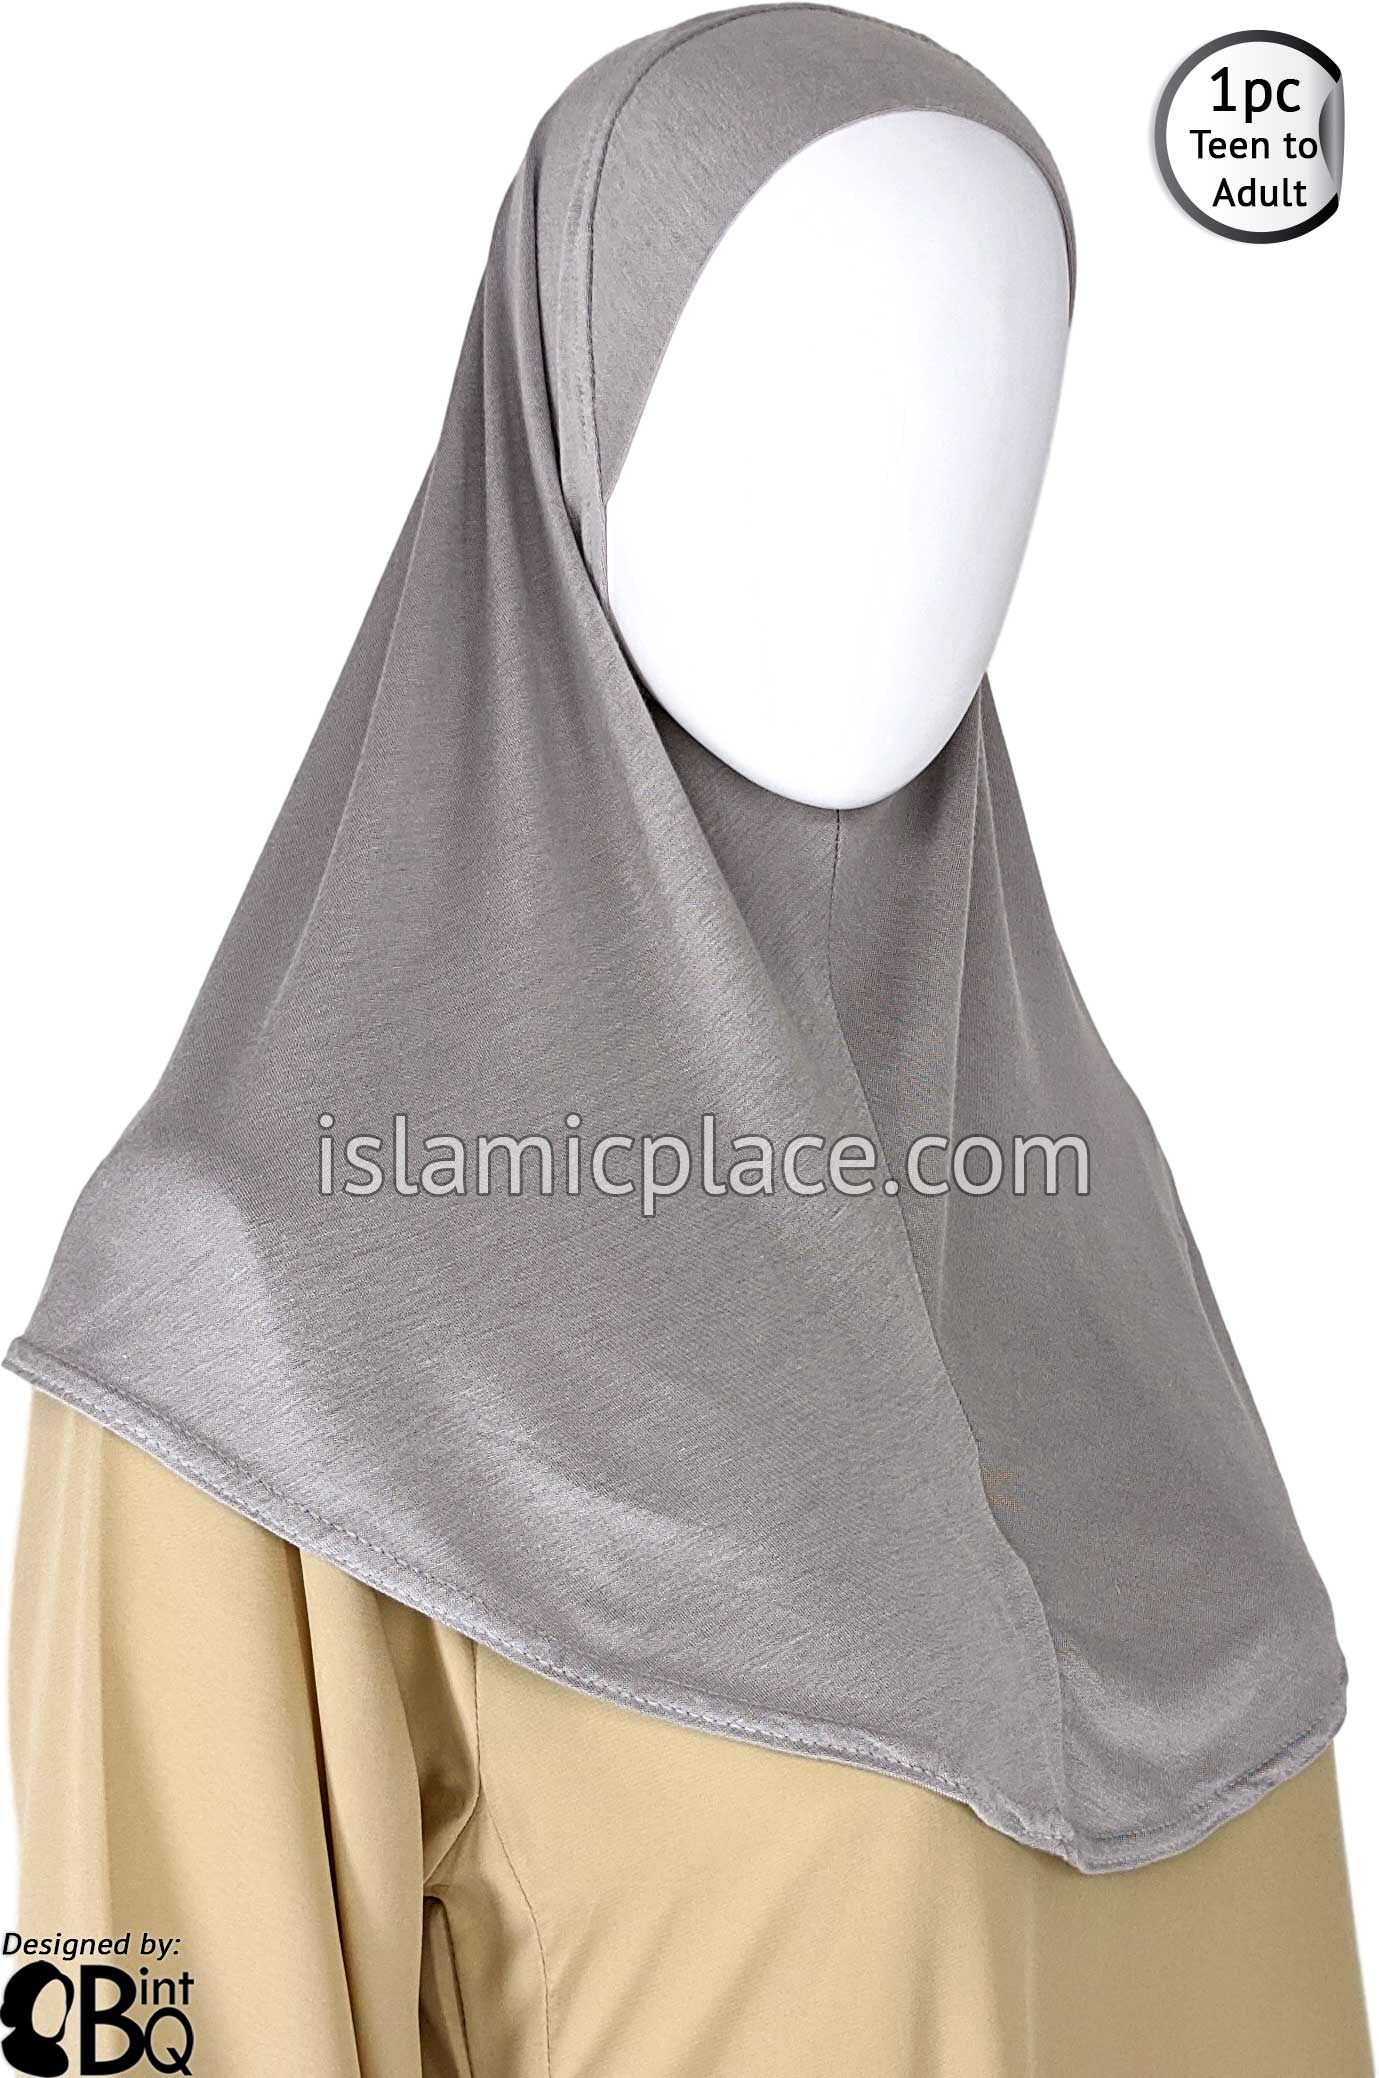 Silver Gray - Plain Teen to Adult (Large) Hijab Al-Amira (1-piece style)